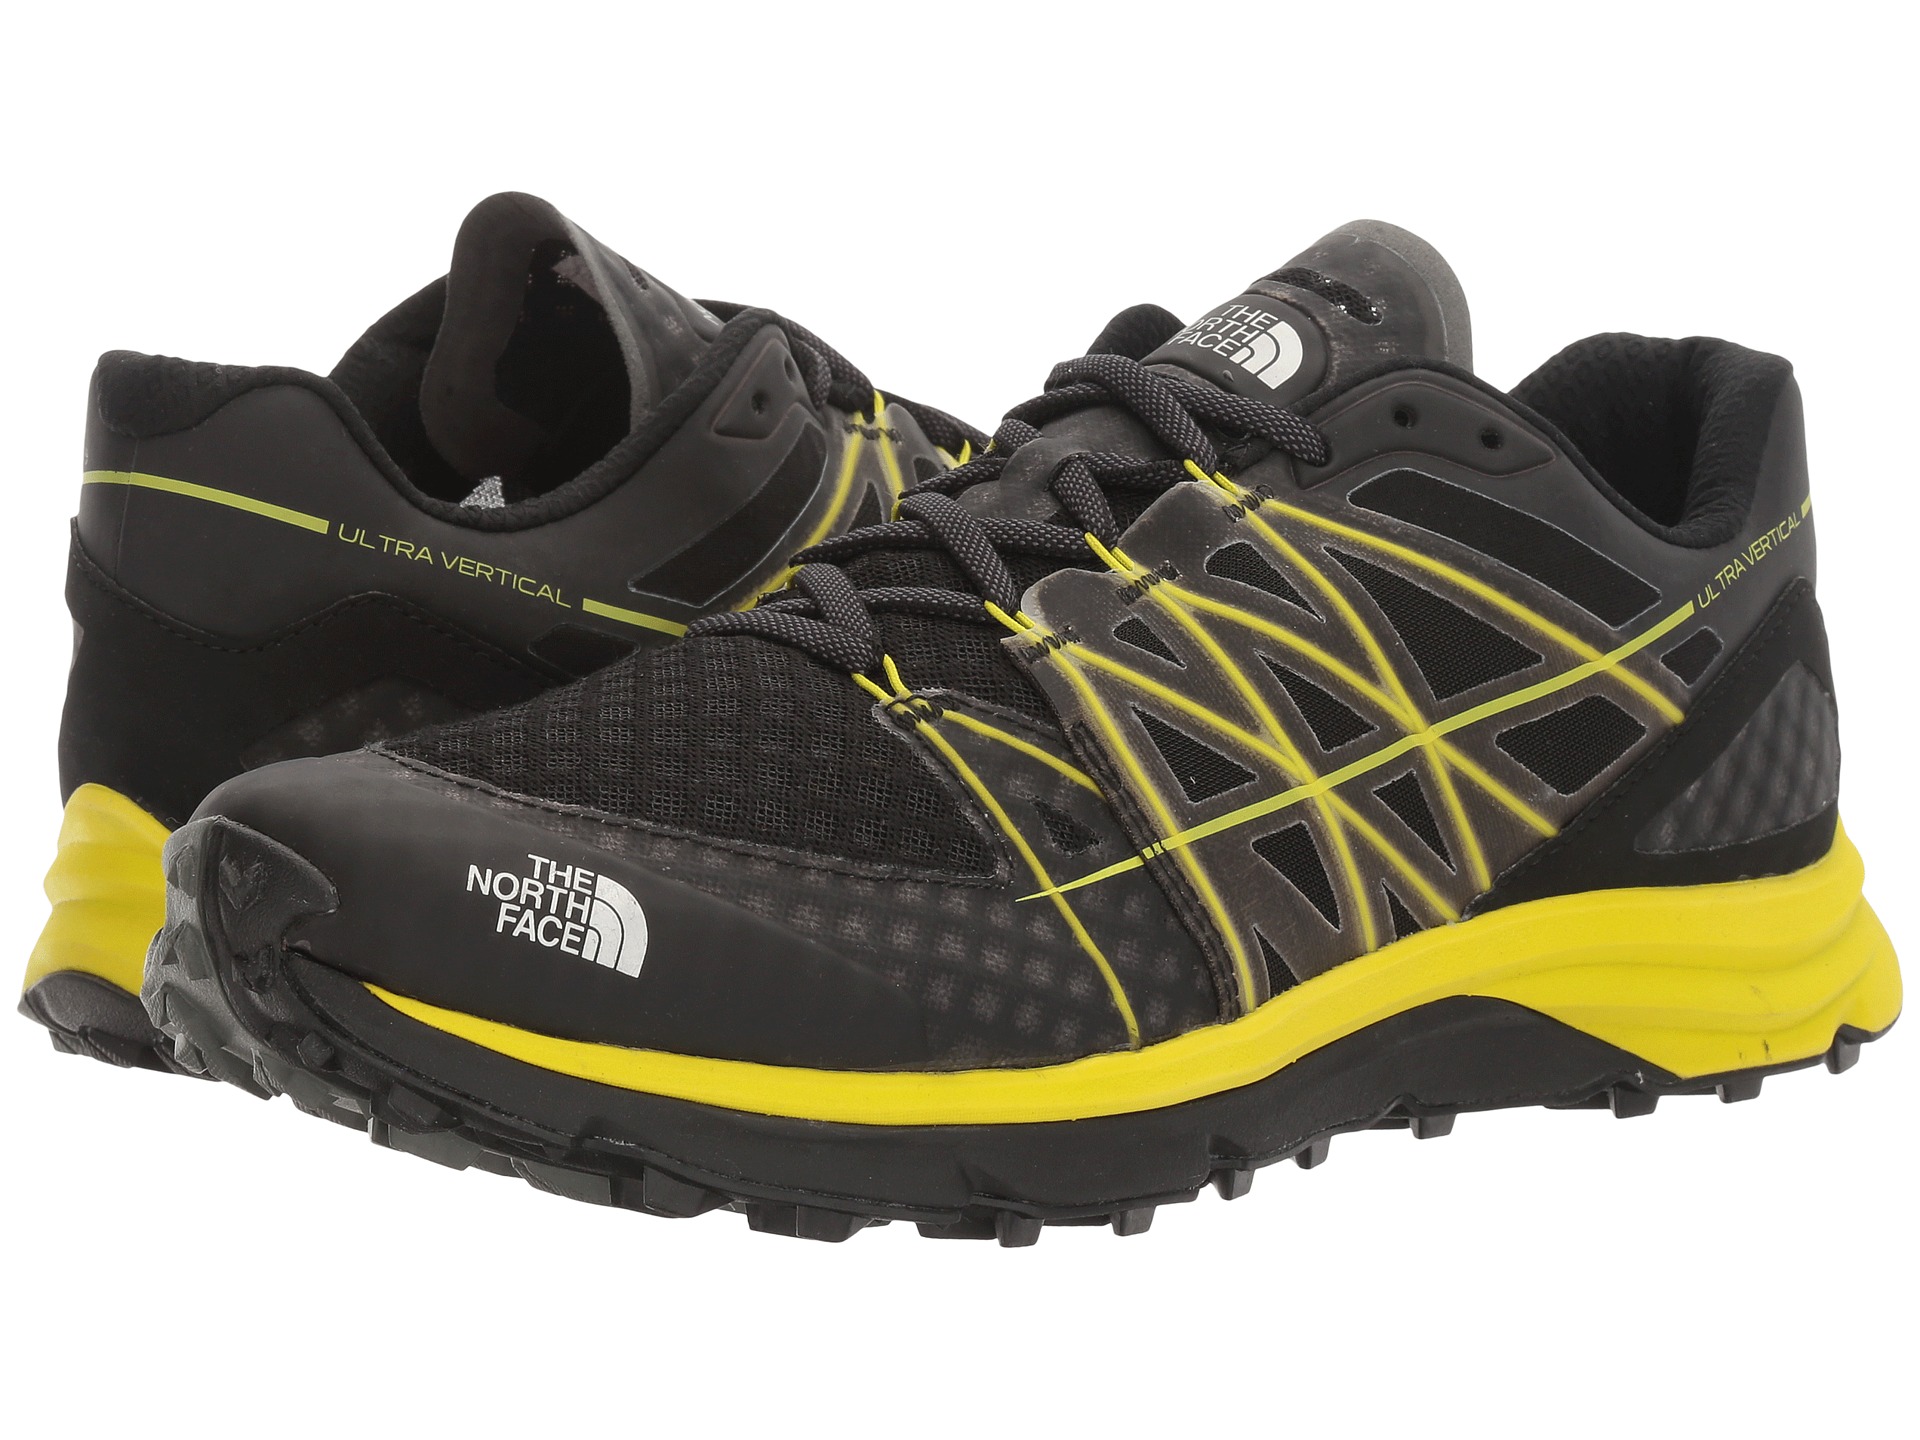 The North Face Ultra Vertical at Zappos.com